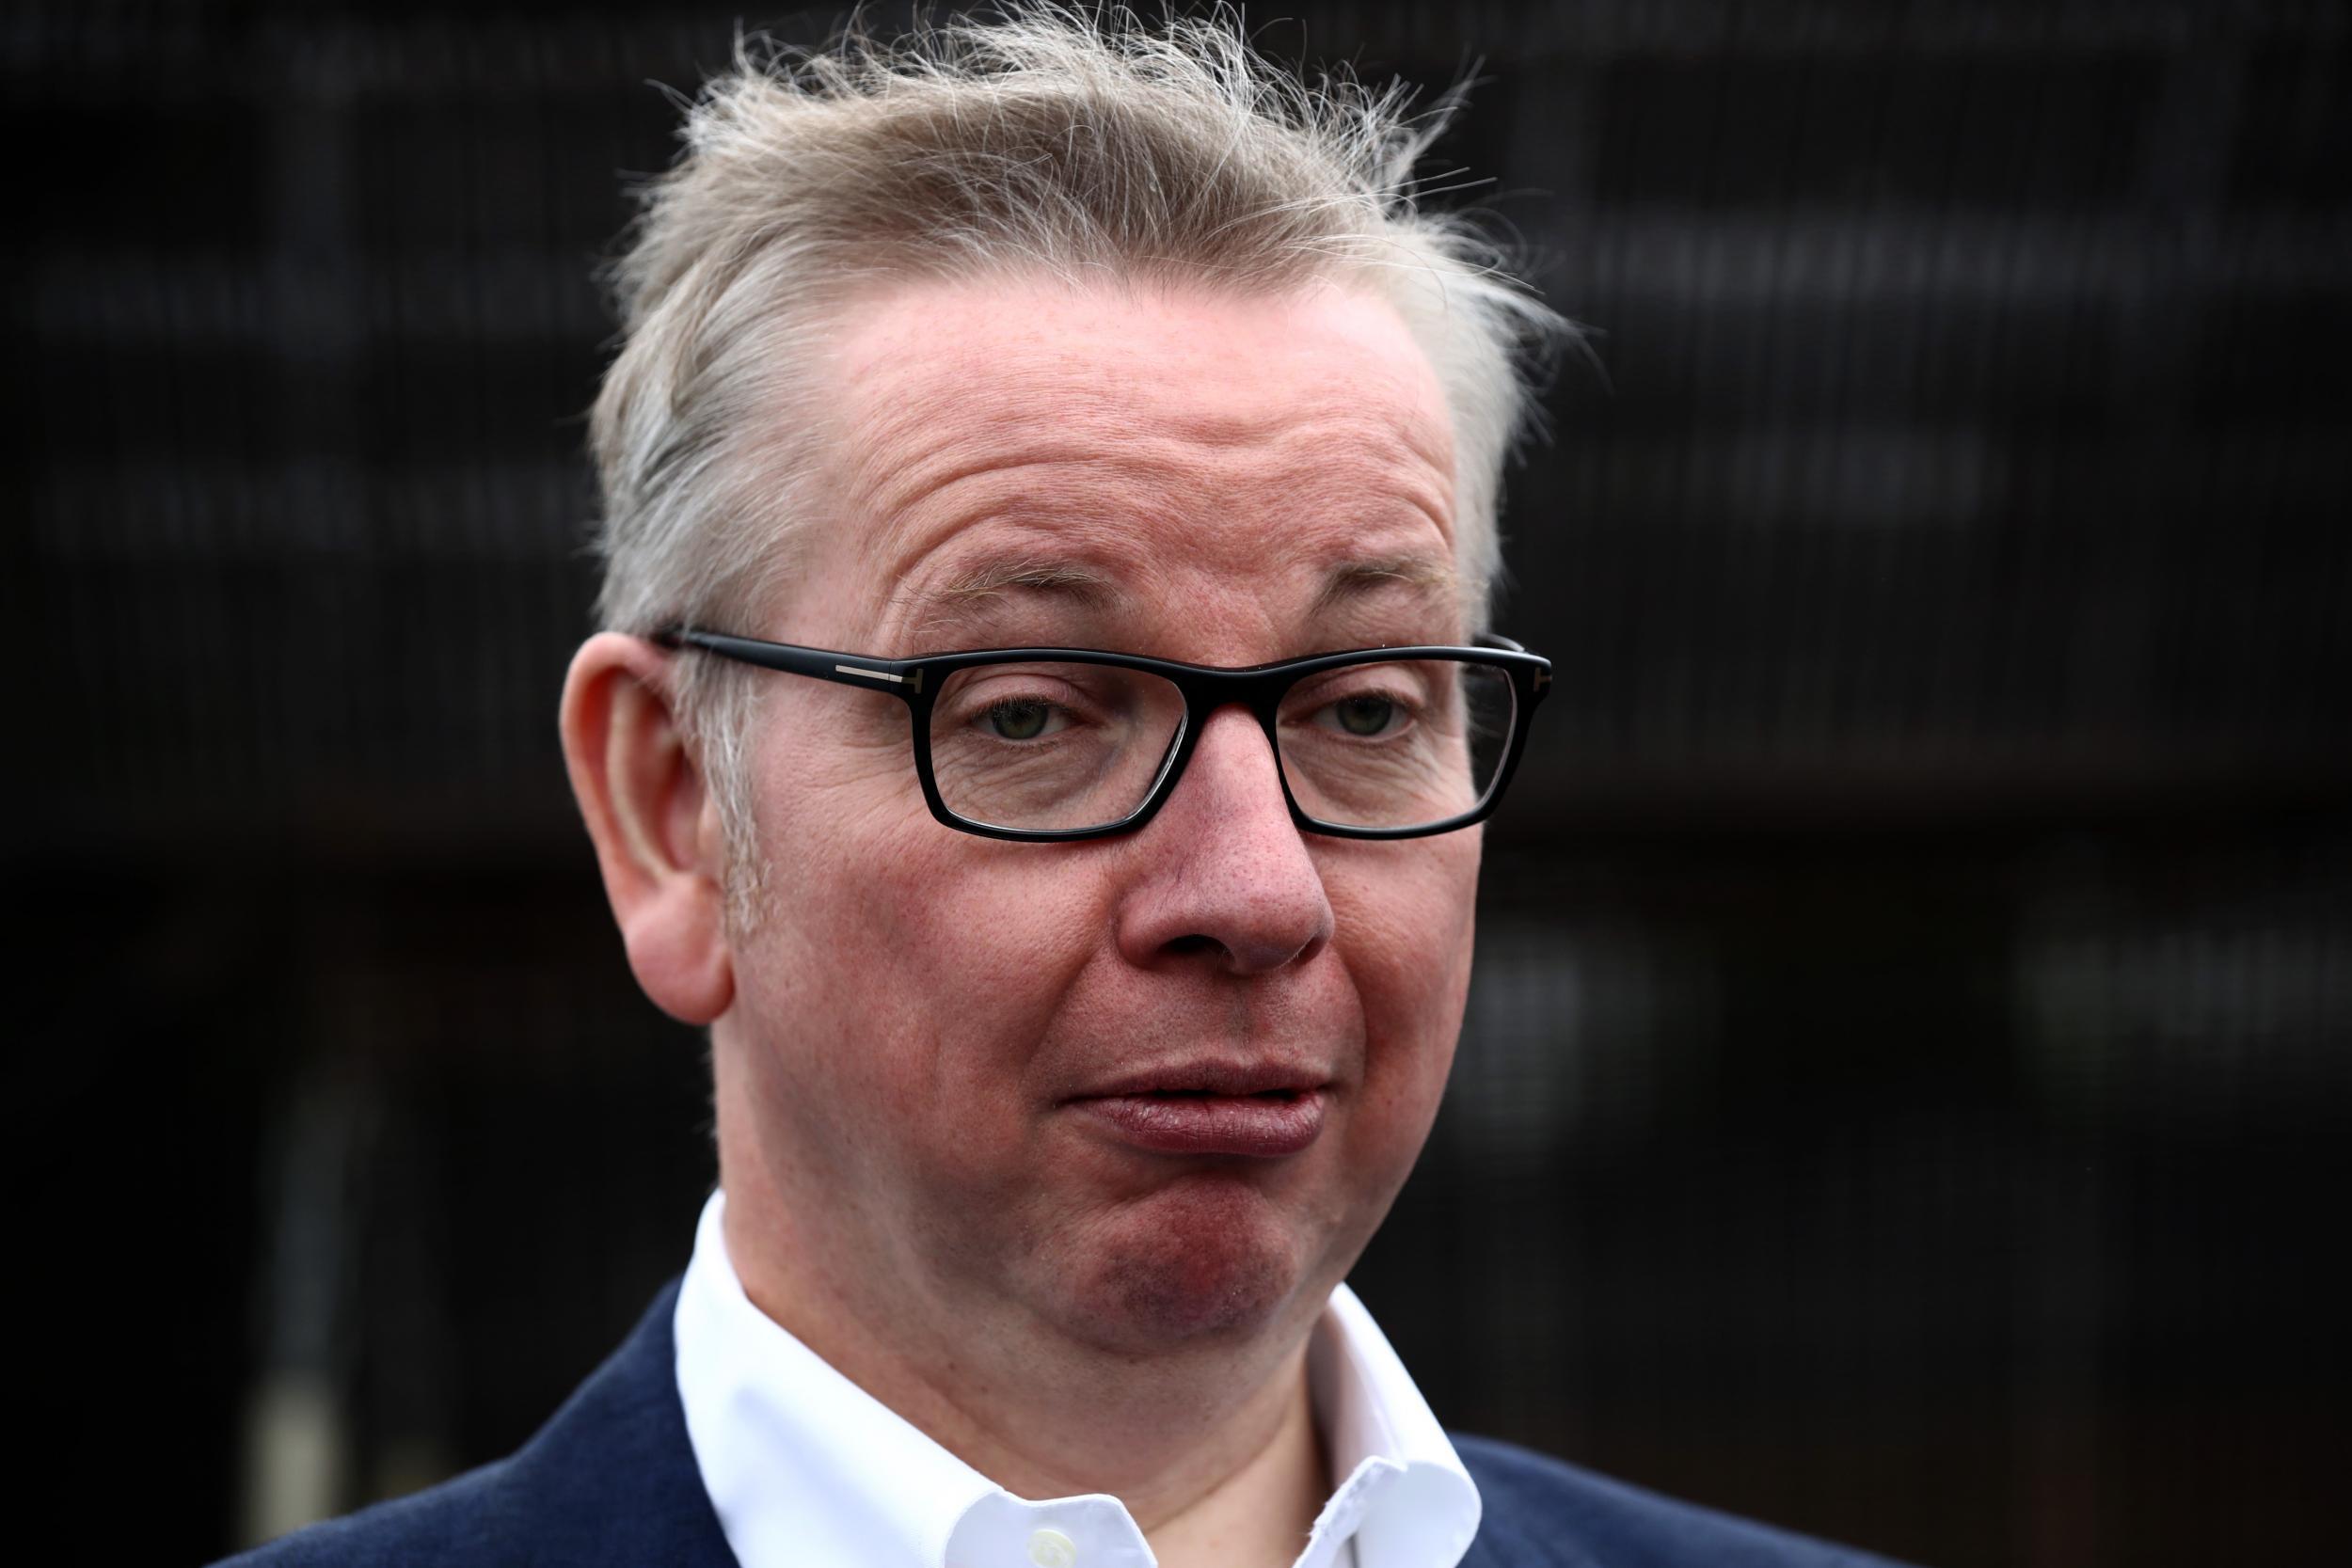 Michael Gove won't make conference easy for Theresa May